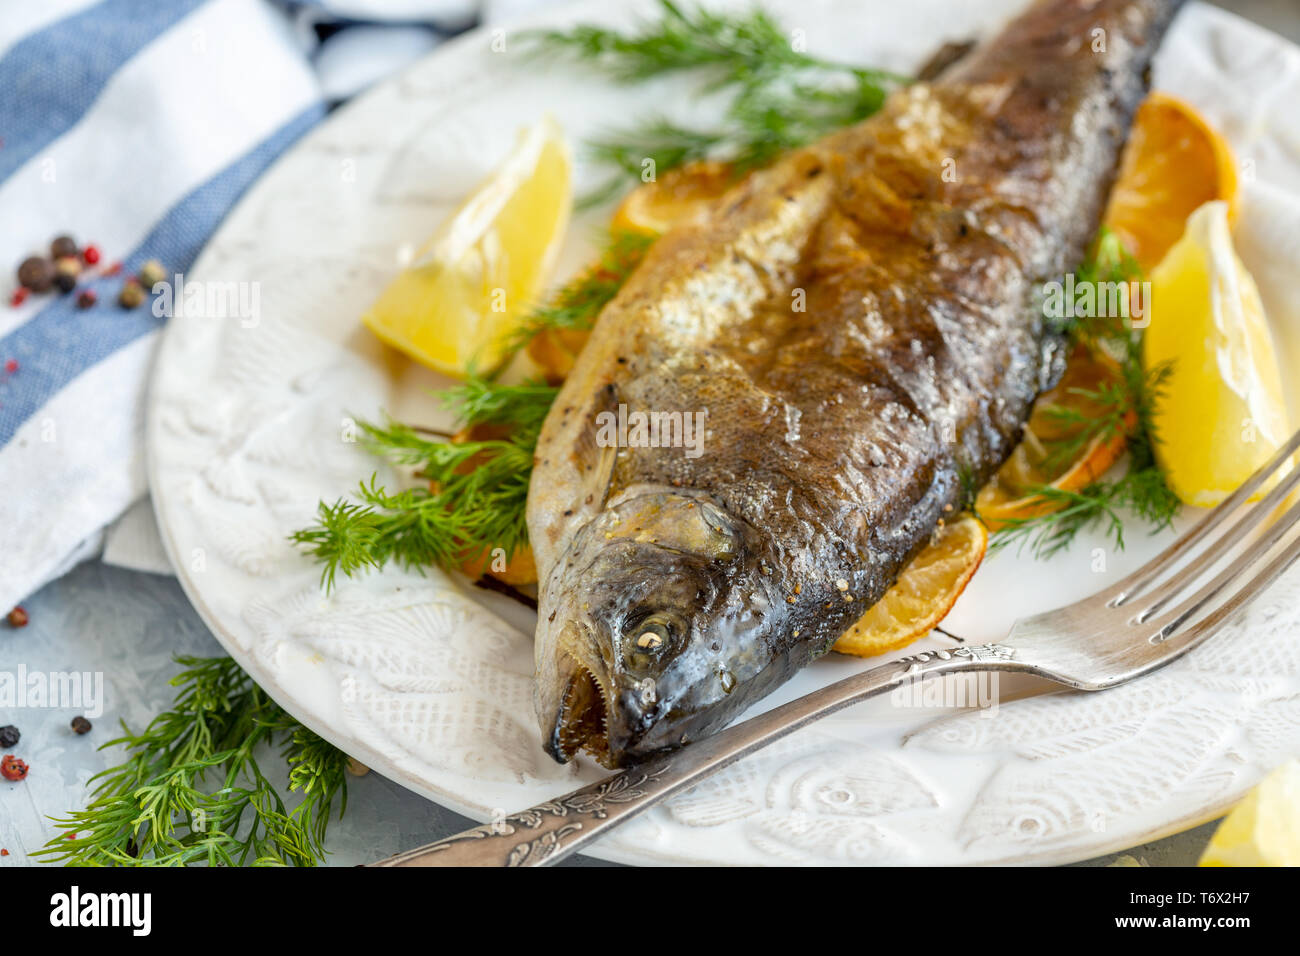 Baked lake trout with lemon and dill. Stock Photo